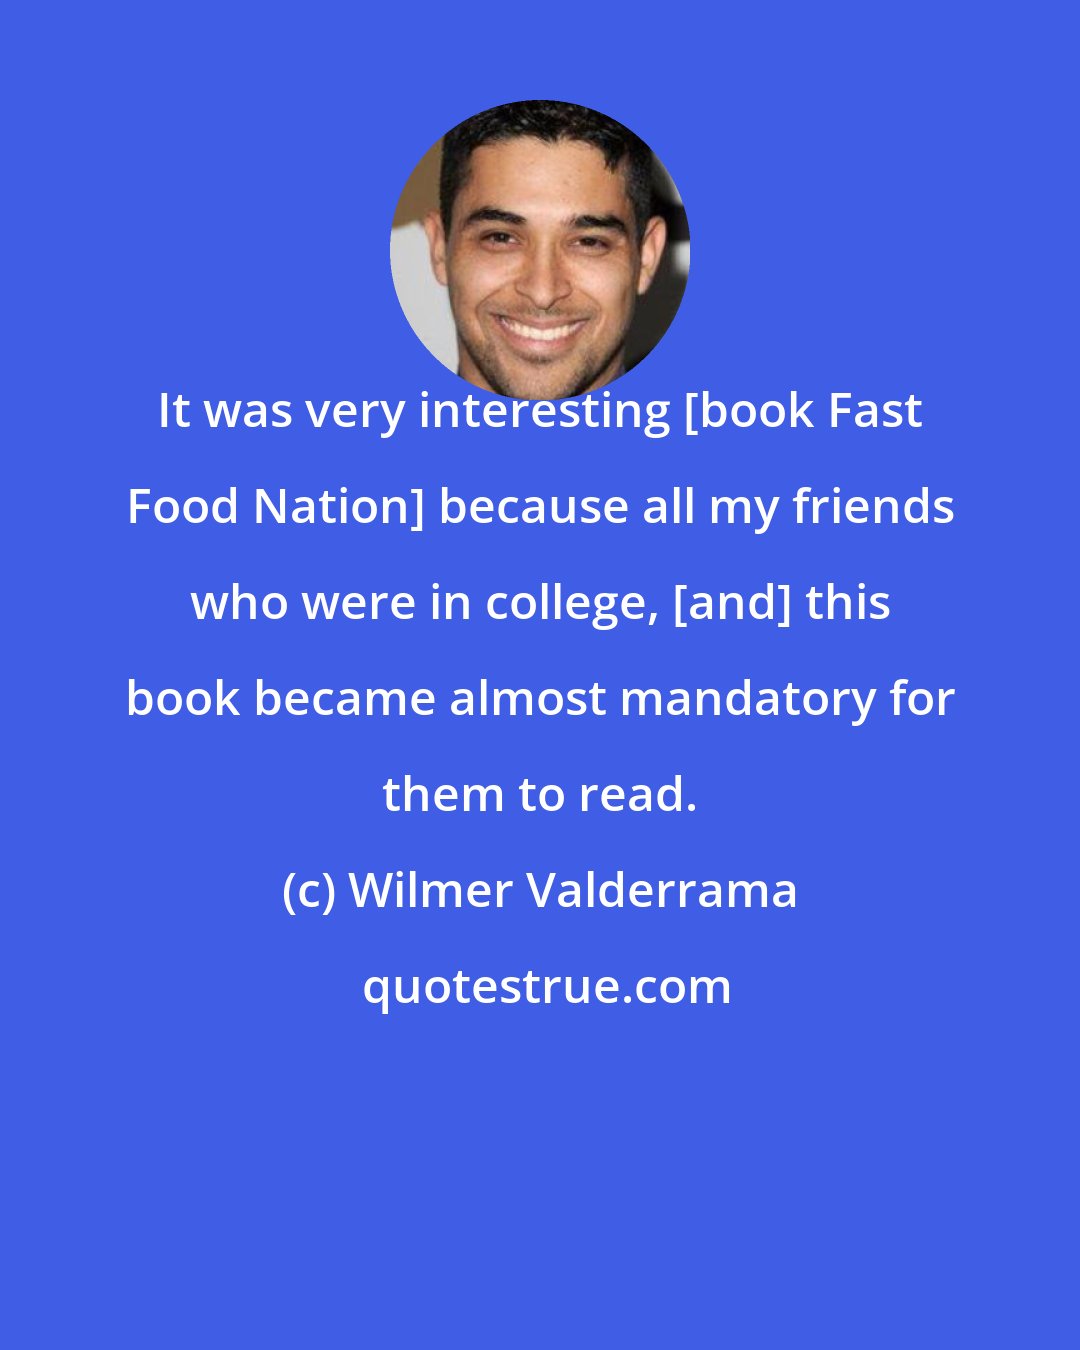 Wilmer Valderrama: It was very interesting [book Fast Food Nation] because all my friends who were in college, [and] this book became almost mandatory for them to read.